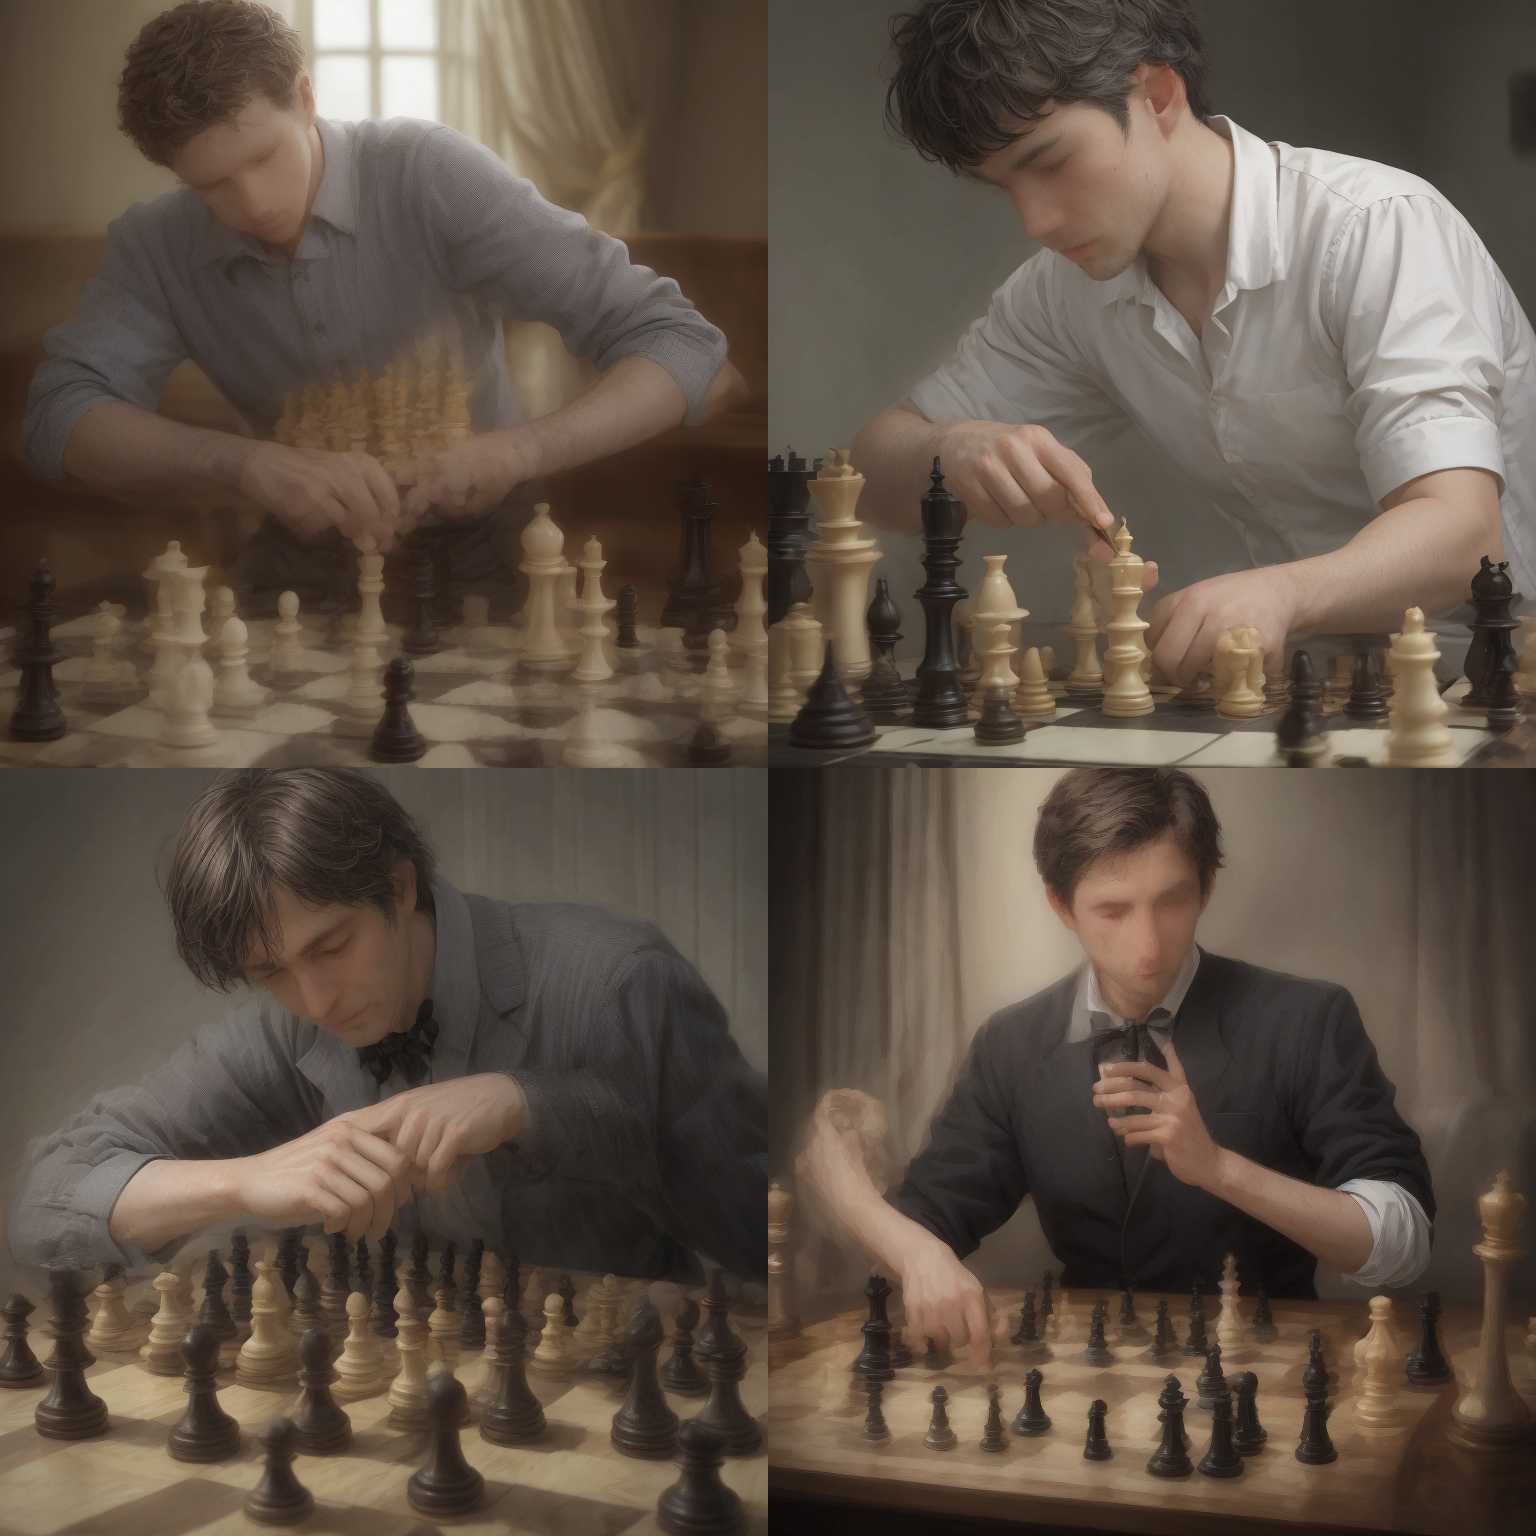 A chess player setting up pieces